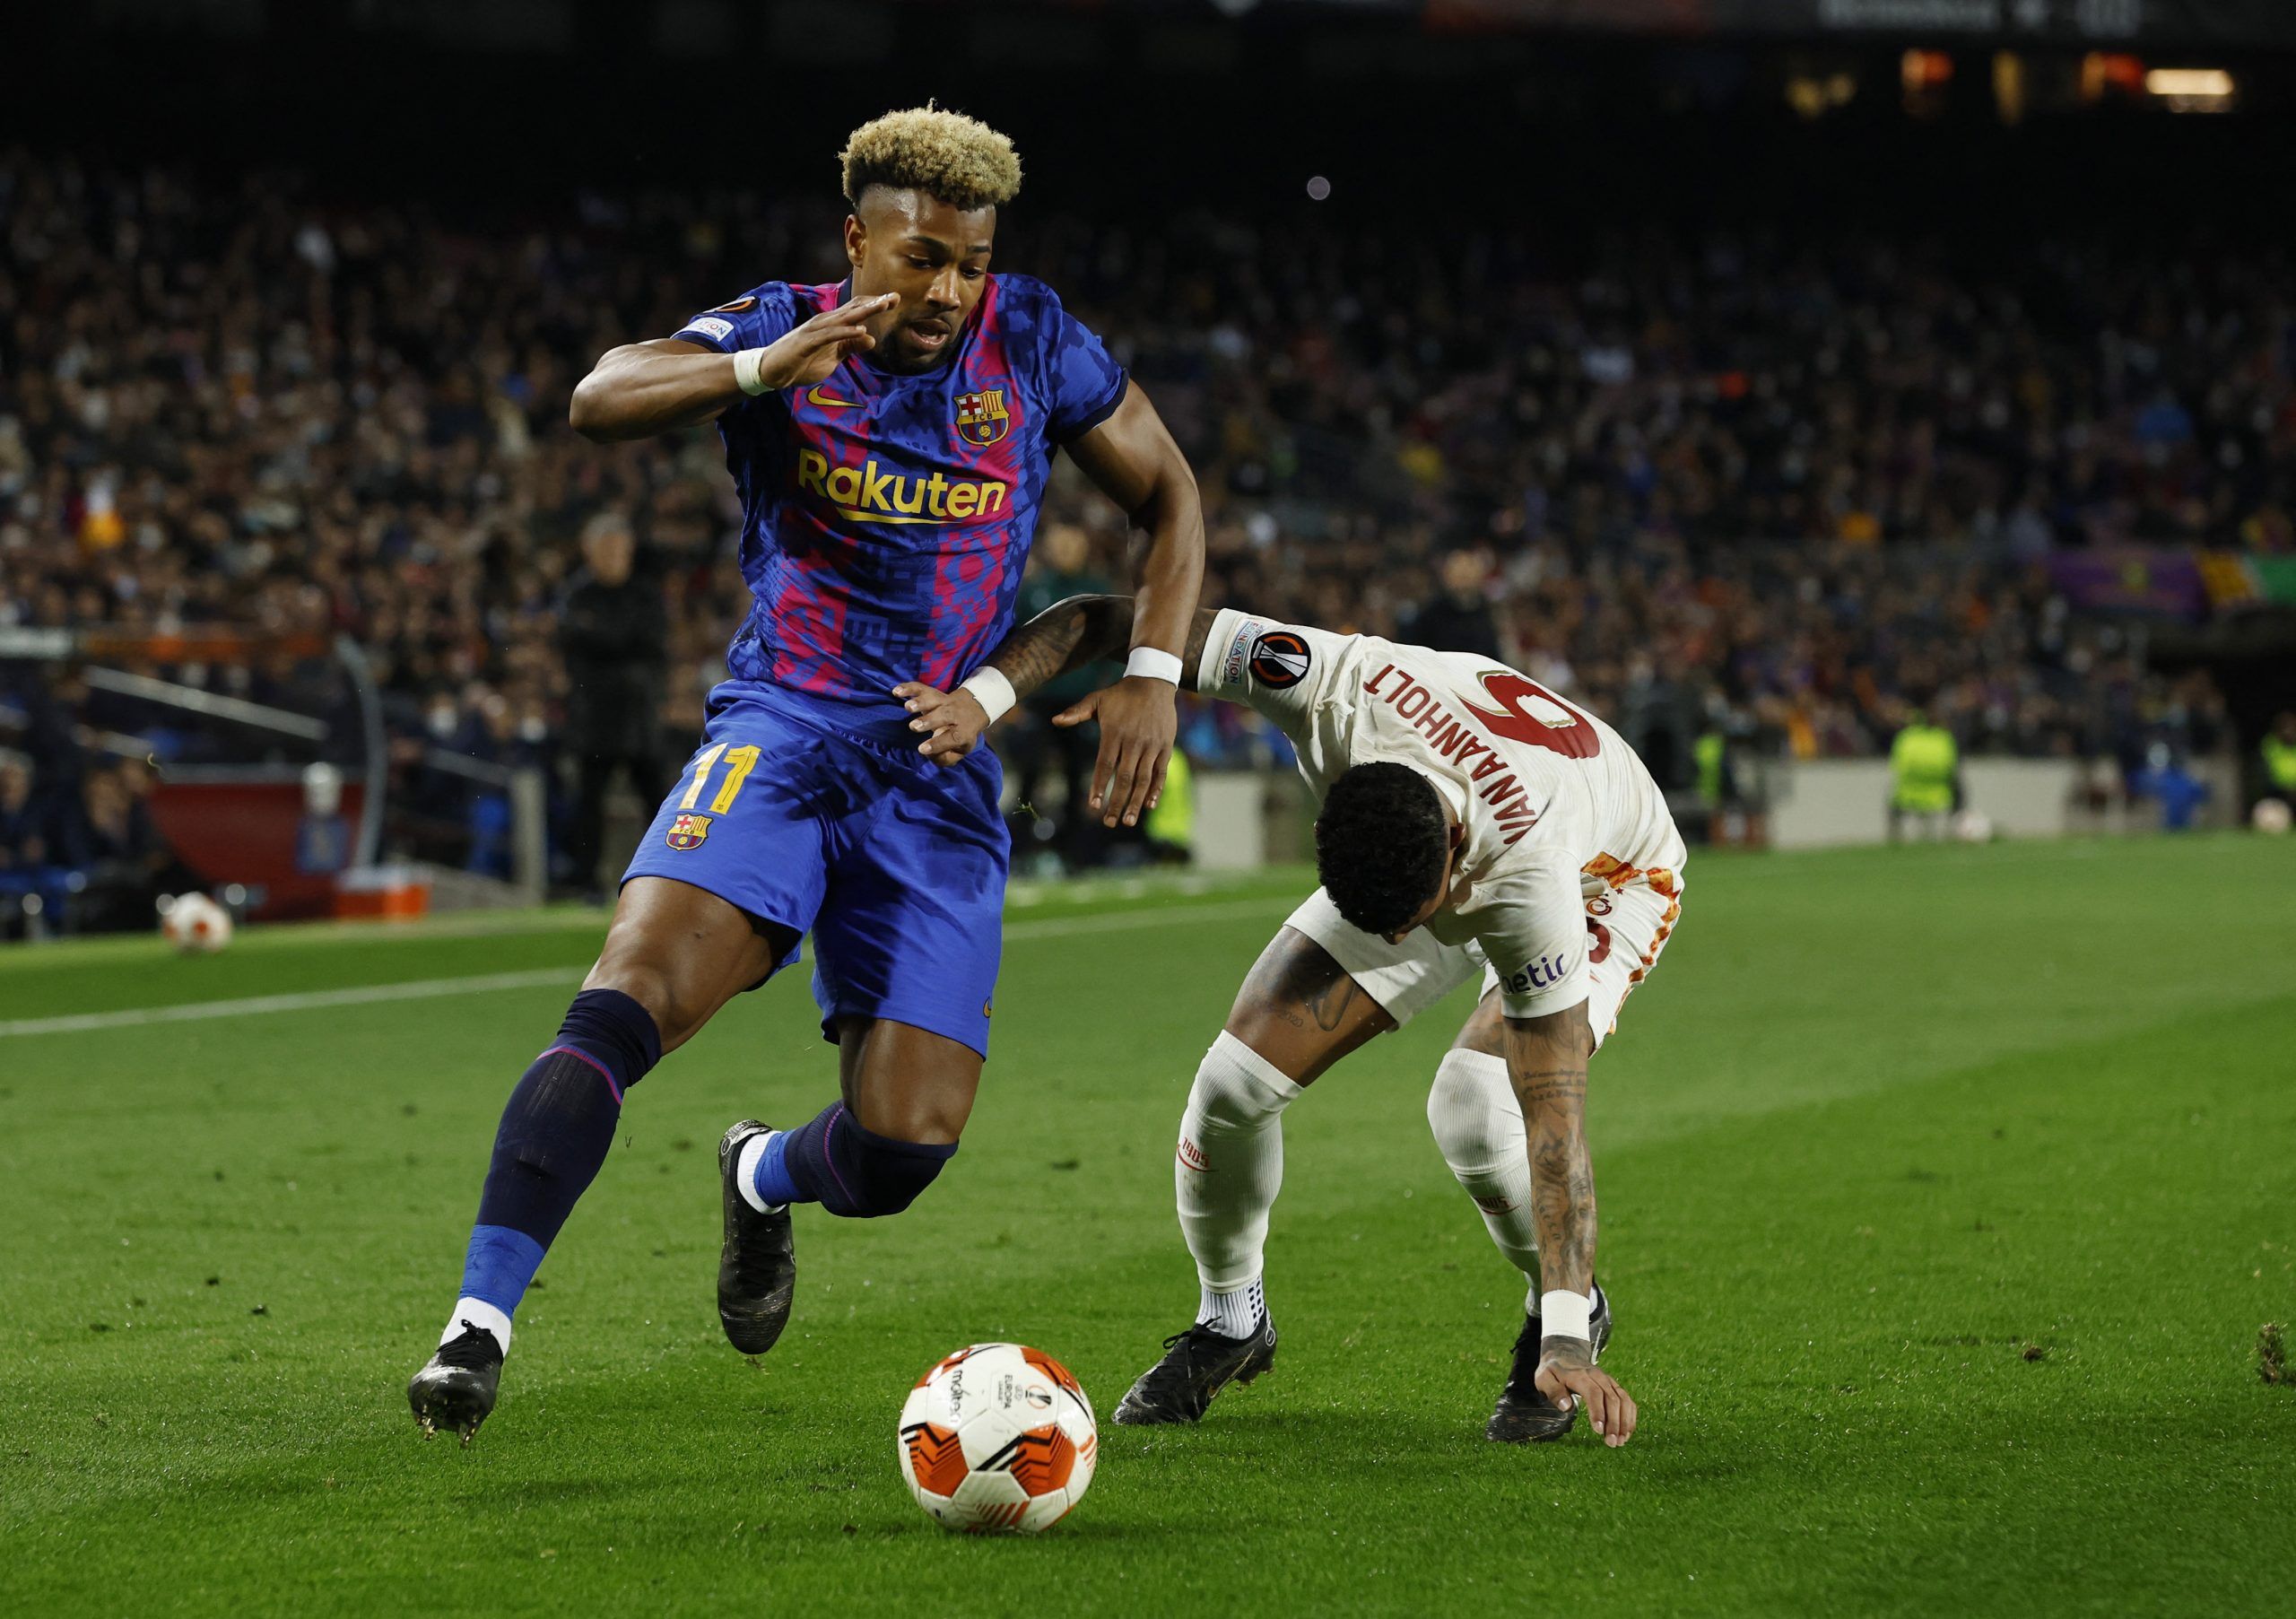 Soccer Football - Europa League - Round of 16 First Leg - FC Barcelona v Galatasaray - Camp Nou, Barcelona, Spain - March 10, 2022 FC Barcelona's Adama Traore in action with Galatasaray's Patrick van Aanholt REUTERS/Albert Gea